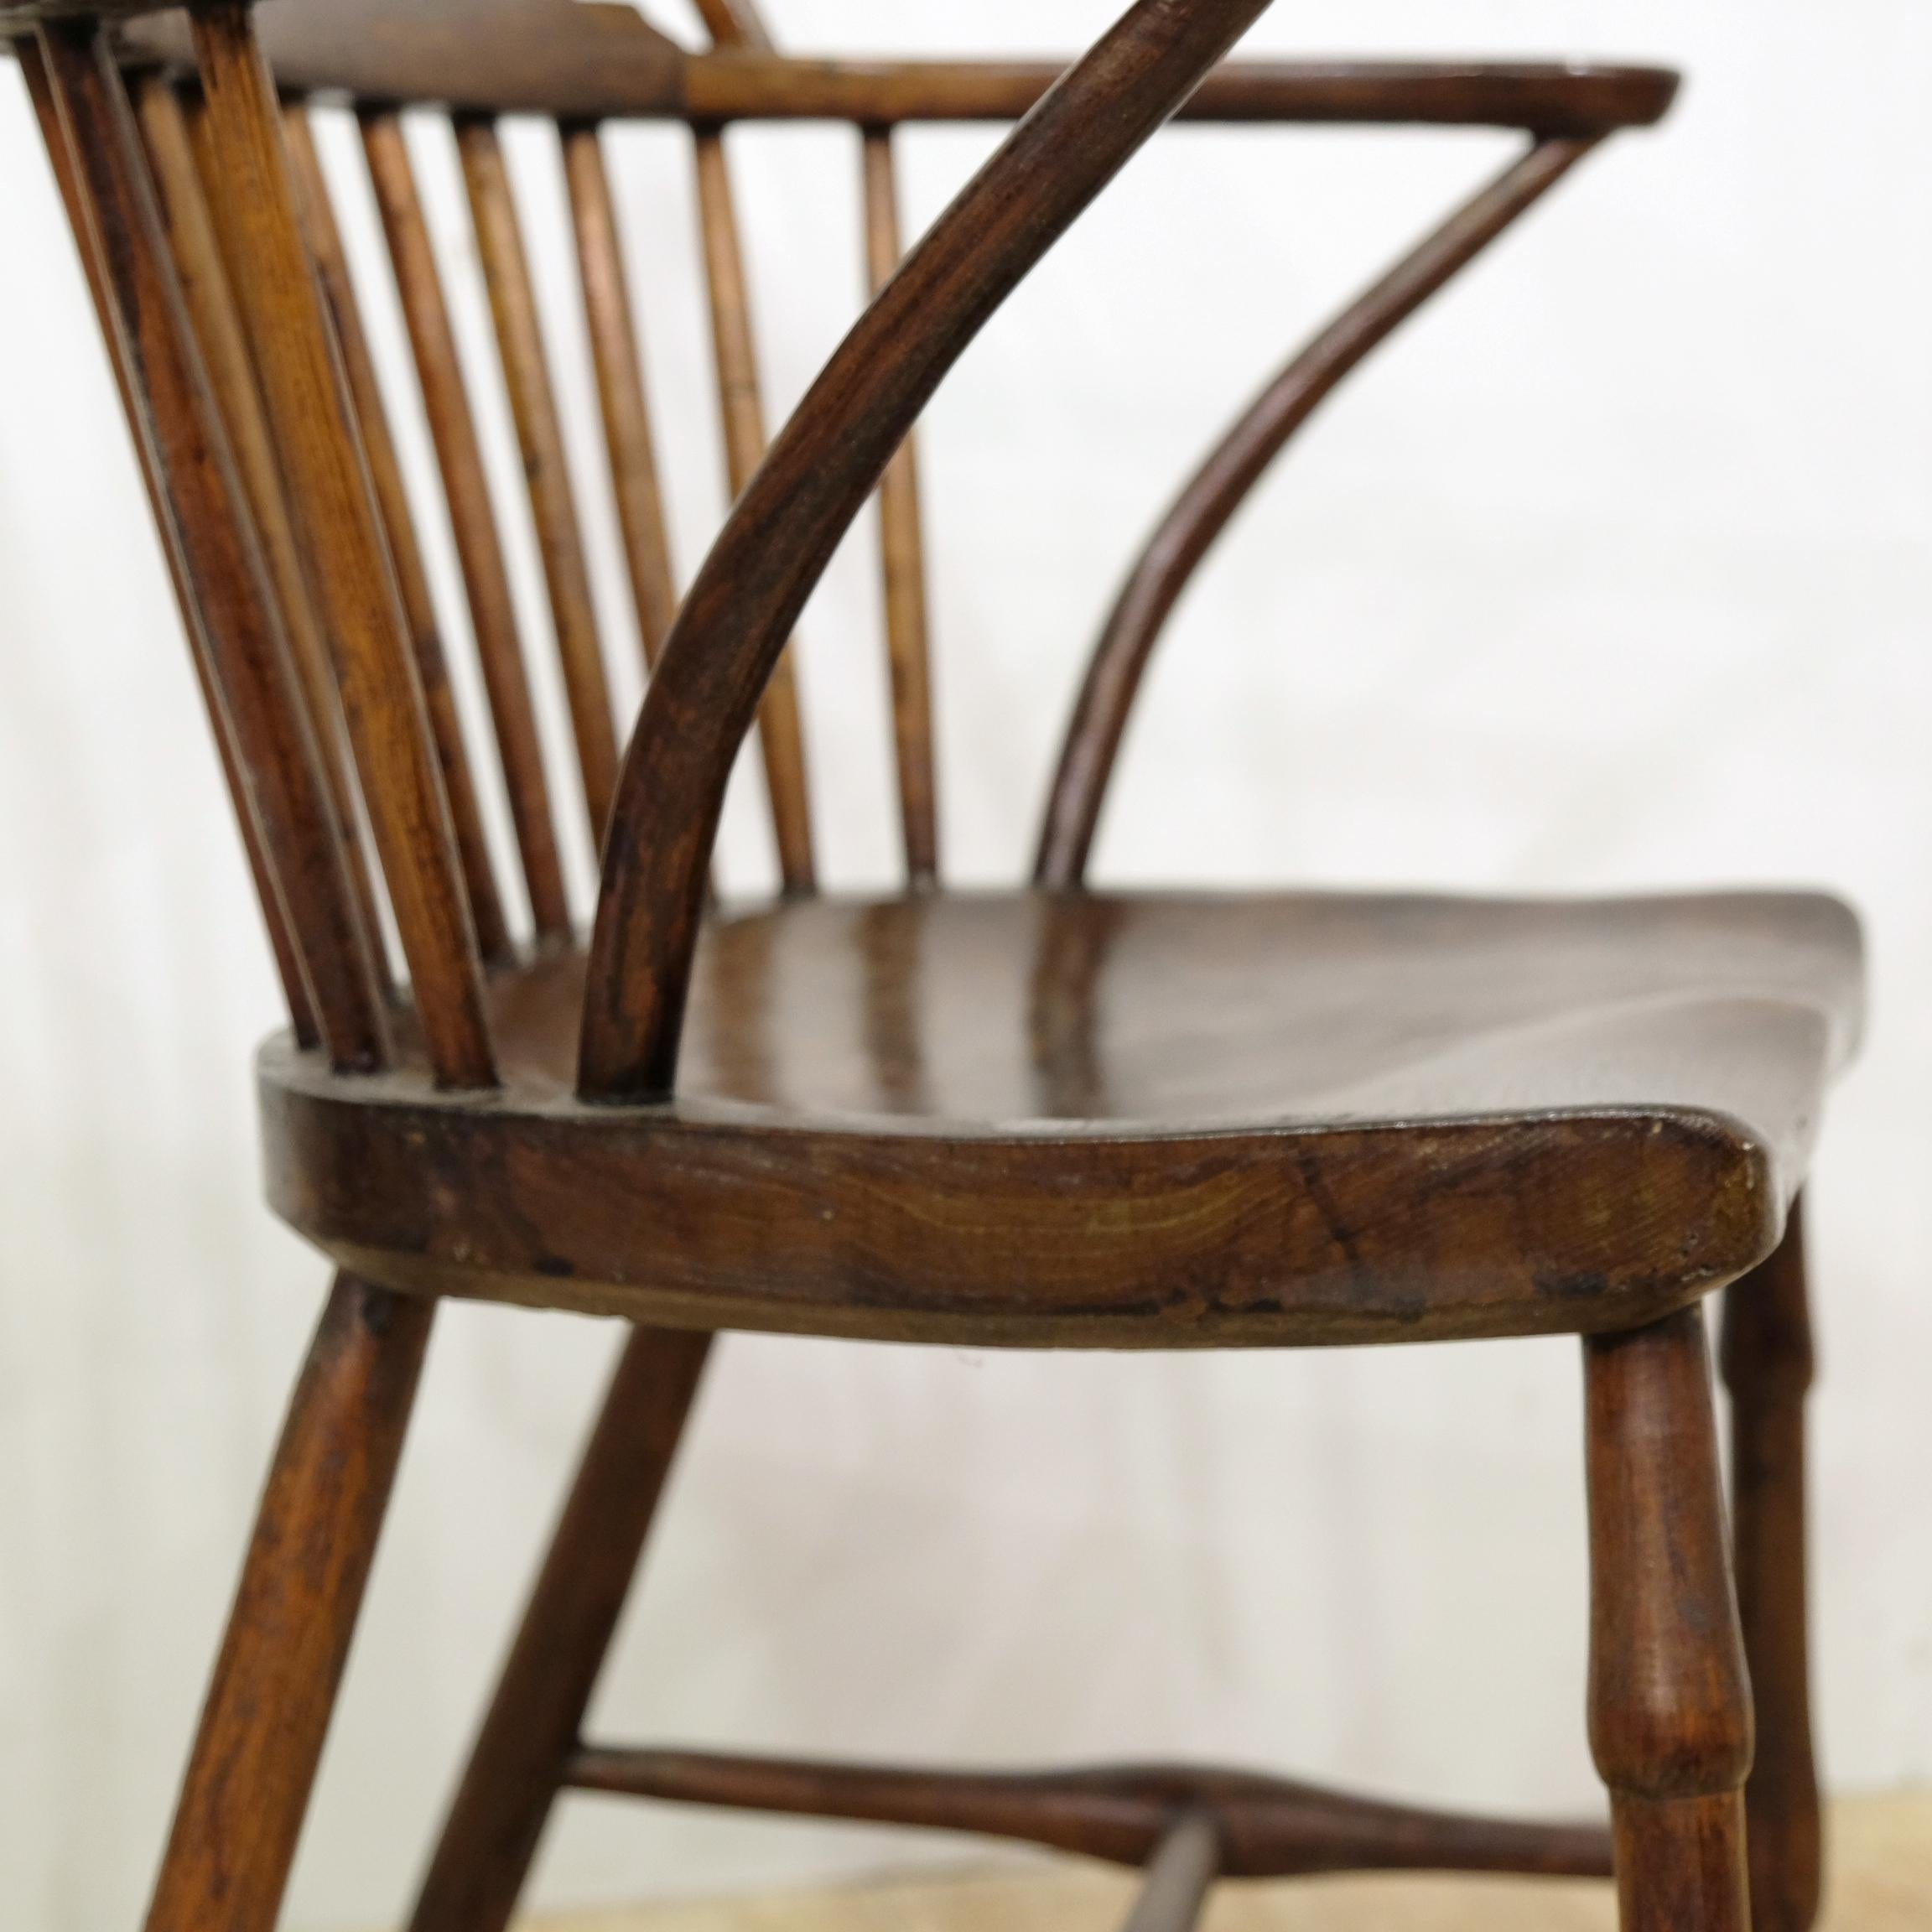 Beech English West Country Mid-19th Century Stickback Windsor Chair